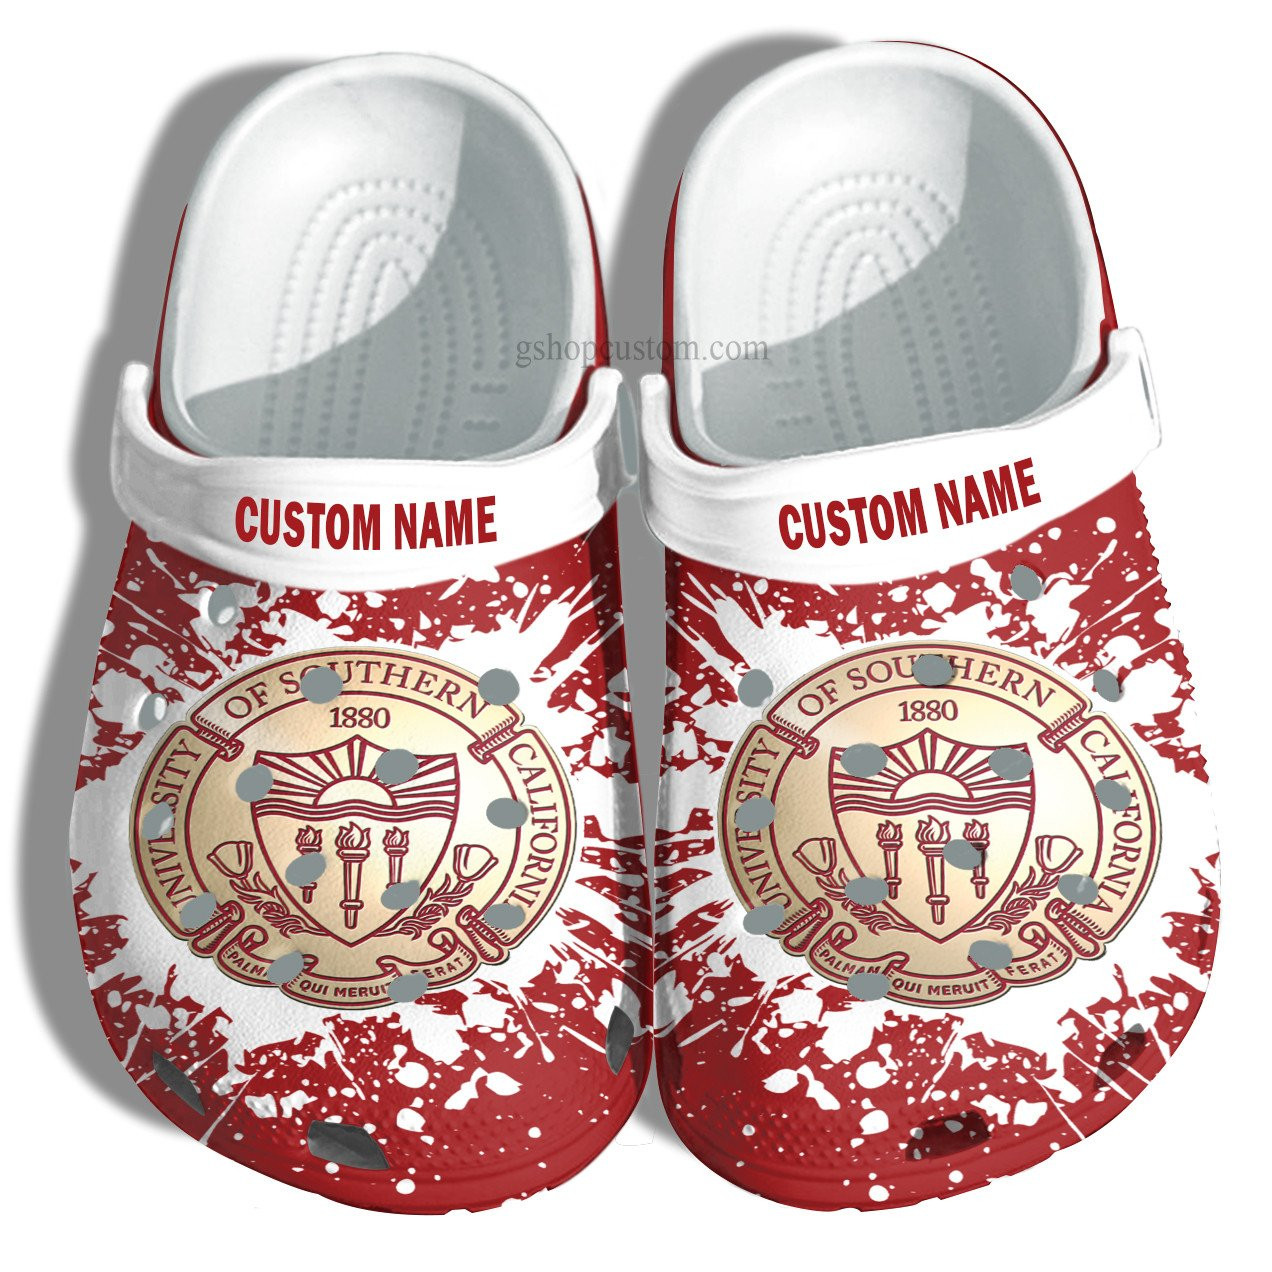 University Of Southern California Graduation Gifts Croc Shoes Customize- Admission Gift Crocs Shoes